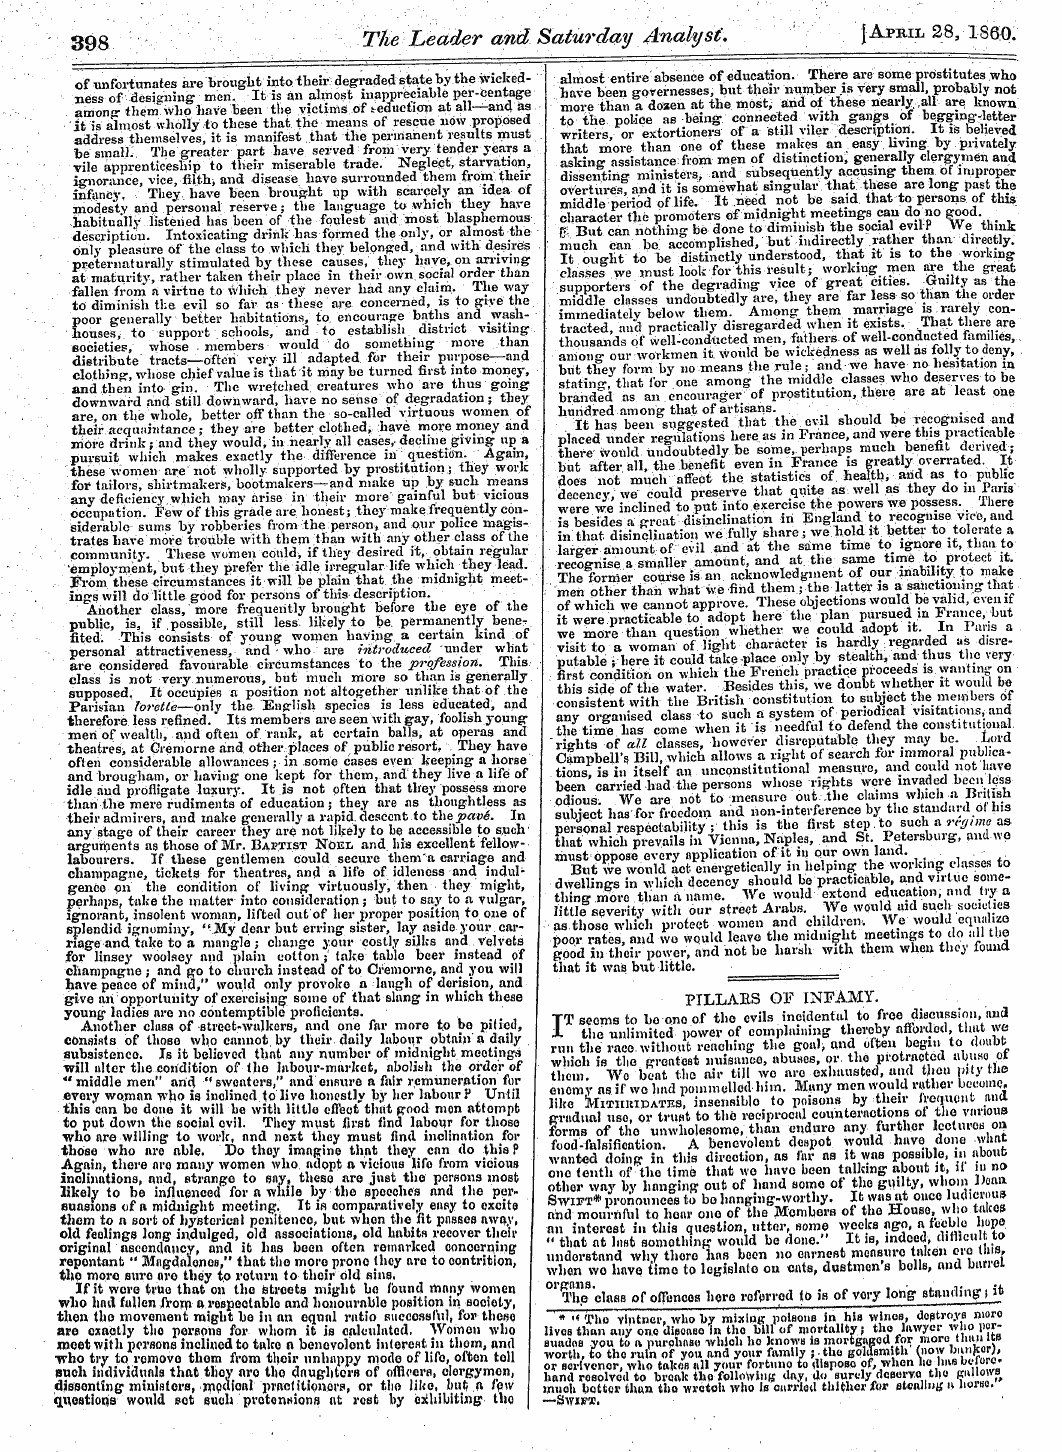 Leader (1850-1860): jS F Y, 2nd edition: 10